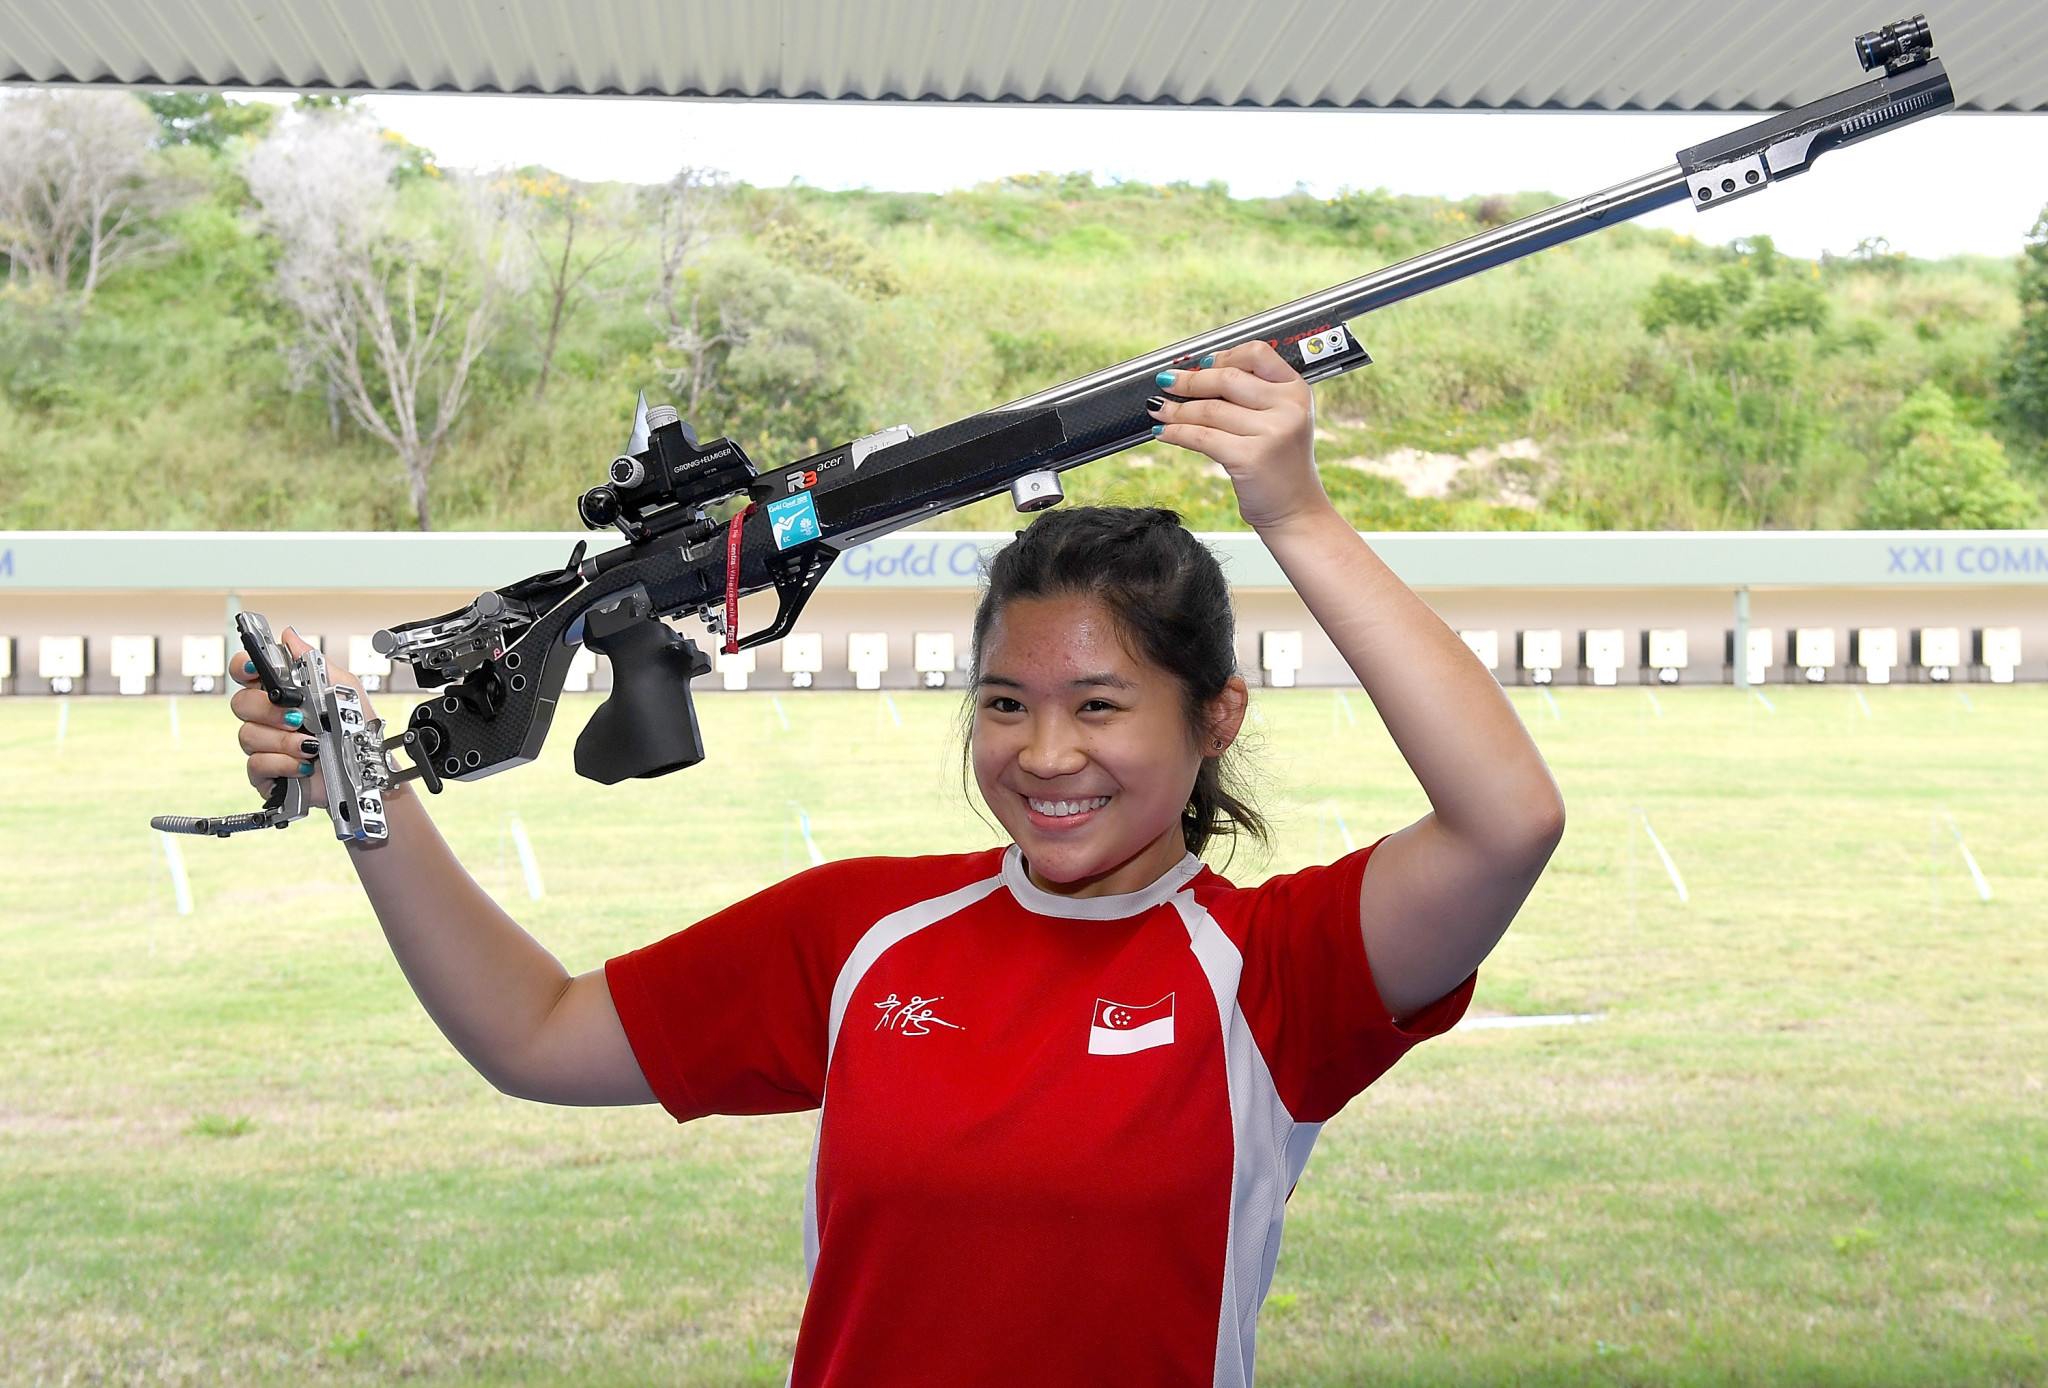 Singaporean breaks Commonwealth Games record to win women's 50m rifle prone event at Gold Coast 2018